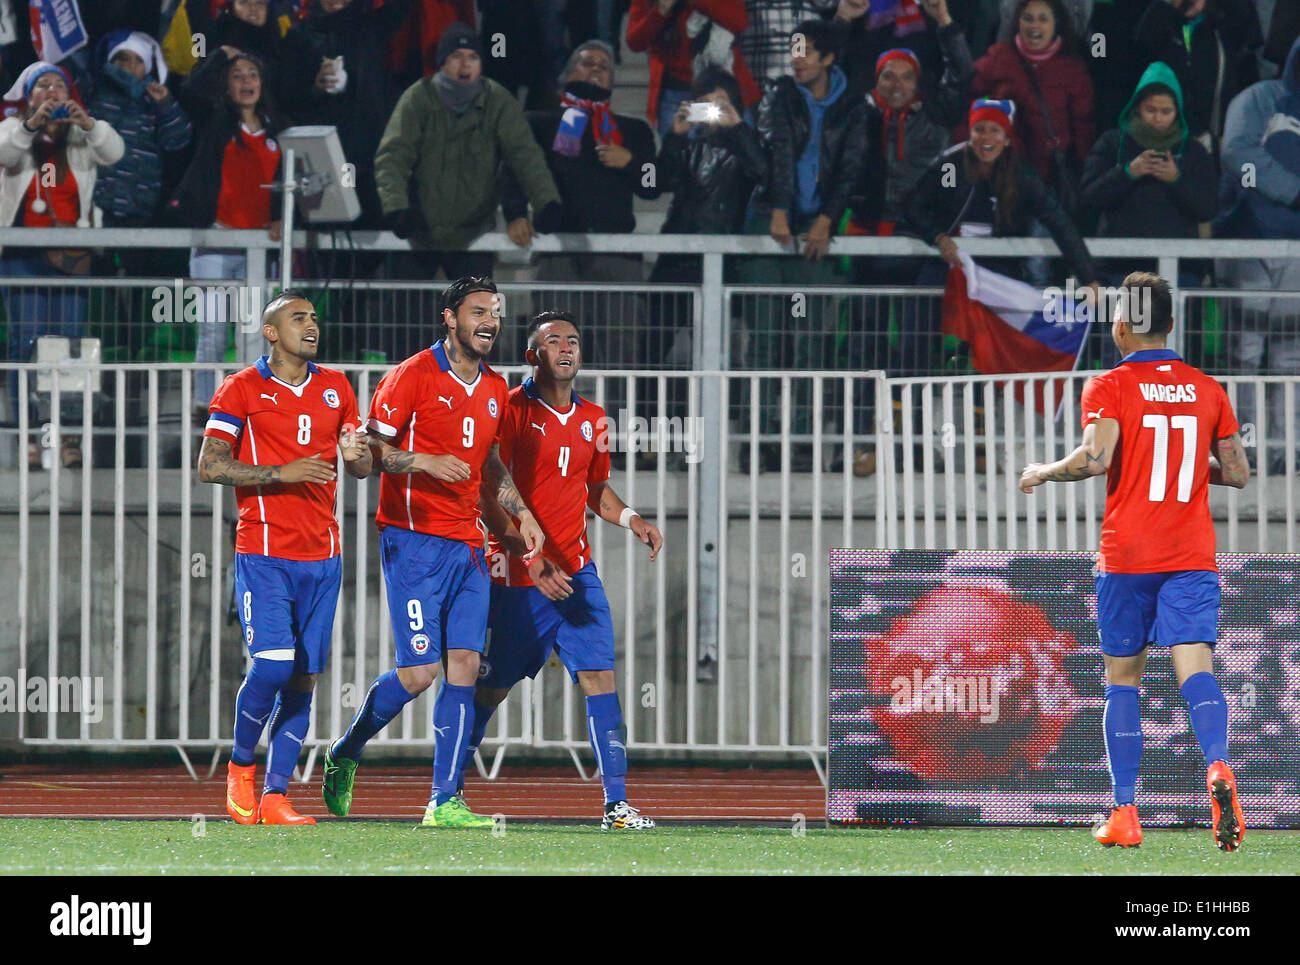 Valparaiso, Chile. 4th June, 2014. Chile's Mauricio Pinilla (2nd L) celebrates after scoring during a friendly match against Northern Ireland, prior to the 2014 FIFA World Cup, held at Elias Figueroa Brander Stadium, in Valparaiso, Chile, on June 4, 2014. © Str/Xinhua/Alamy Live News Stock Photo